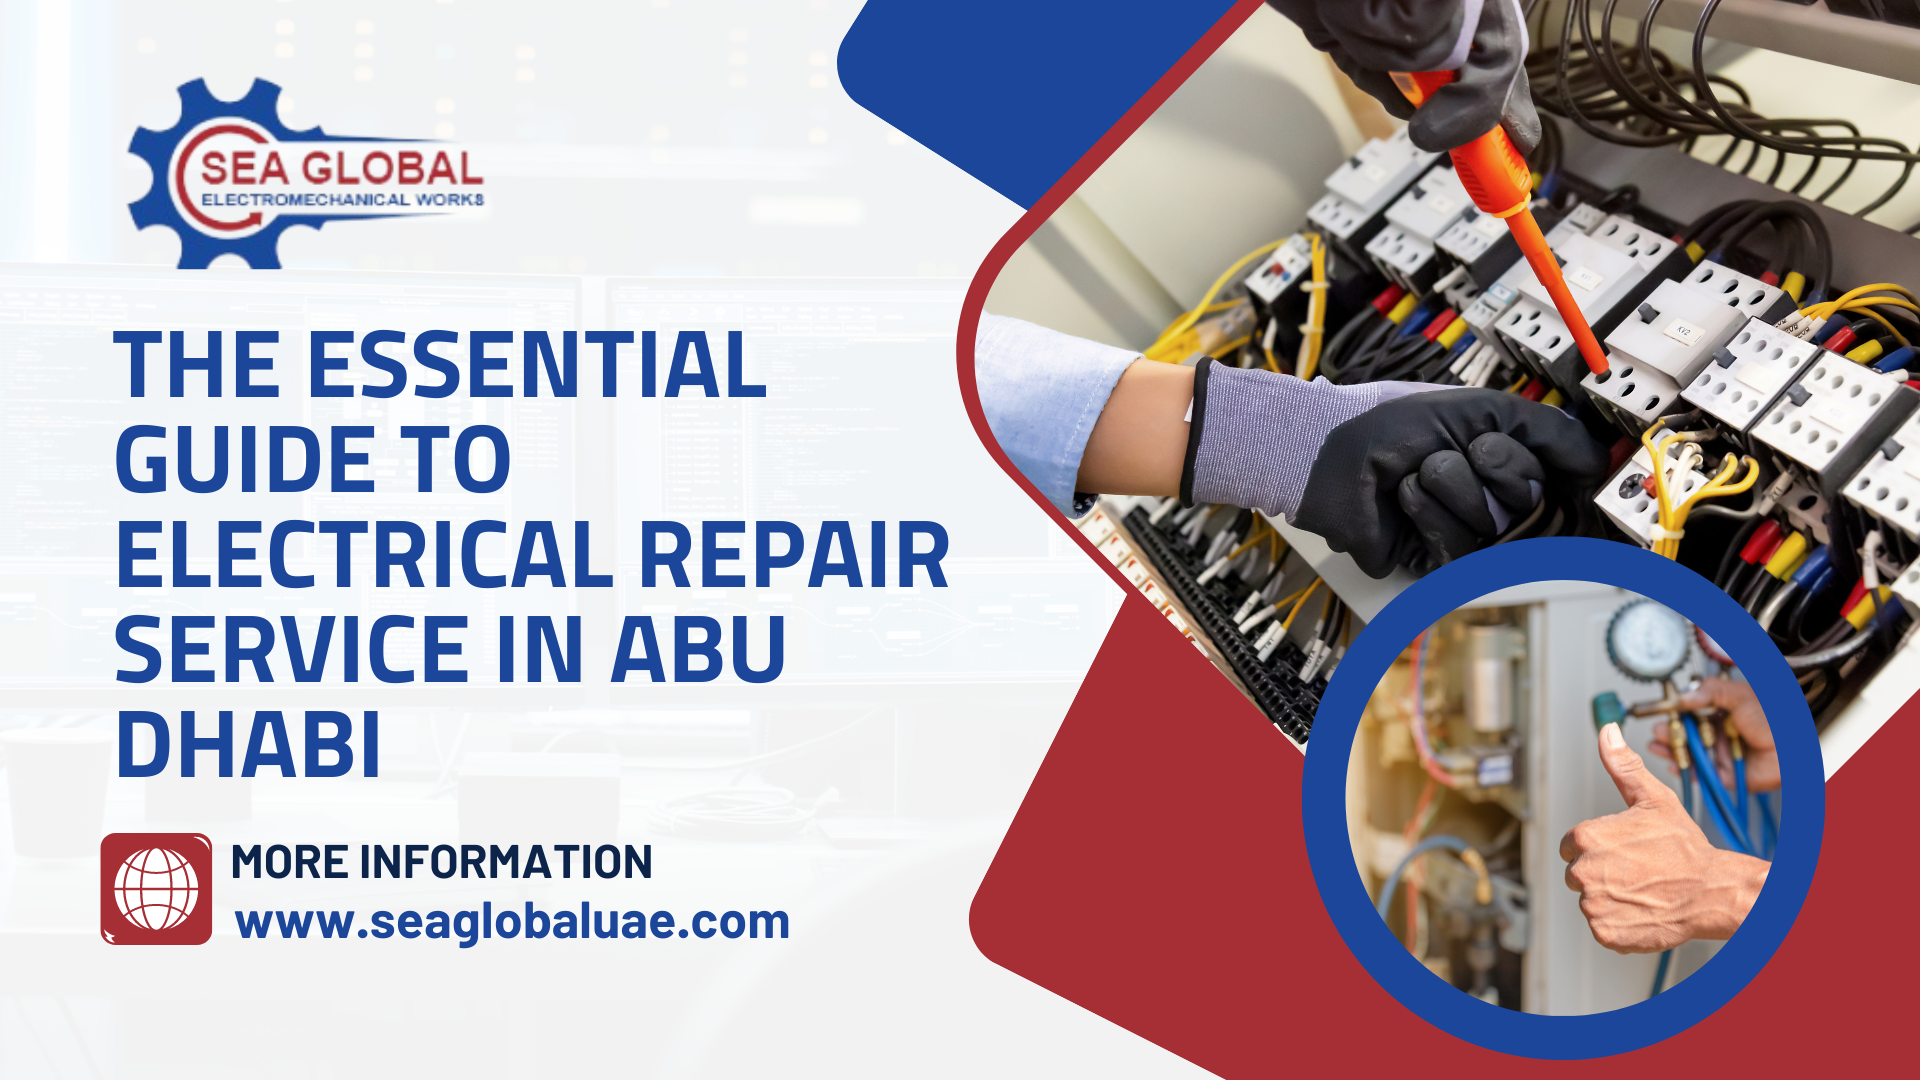 The Essential Guide to Electrical Repair Service in Abu Dhabi